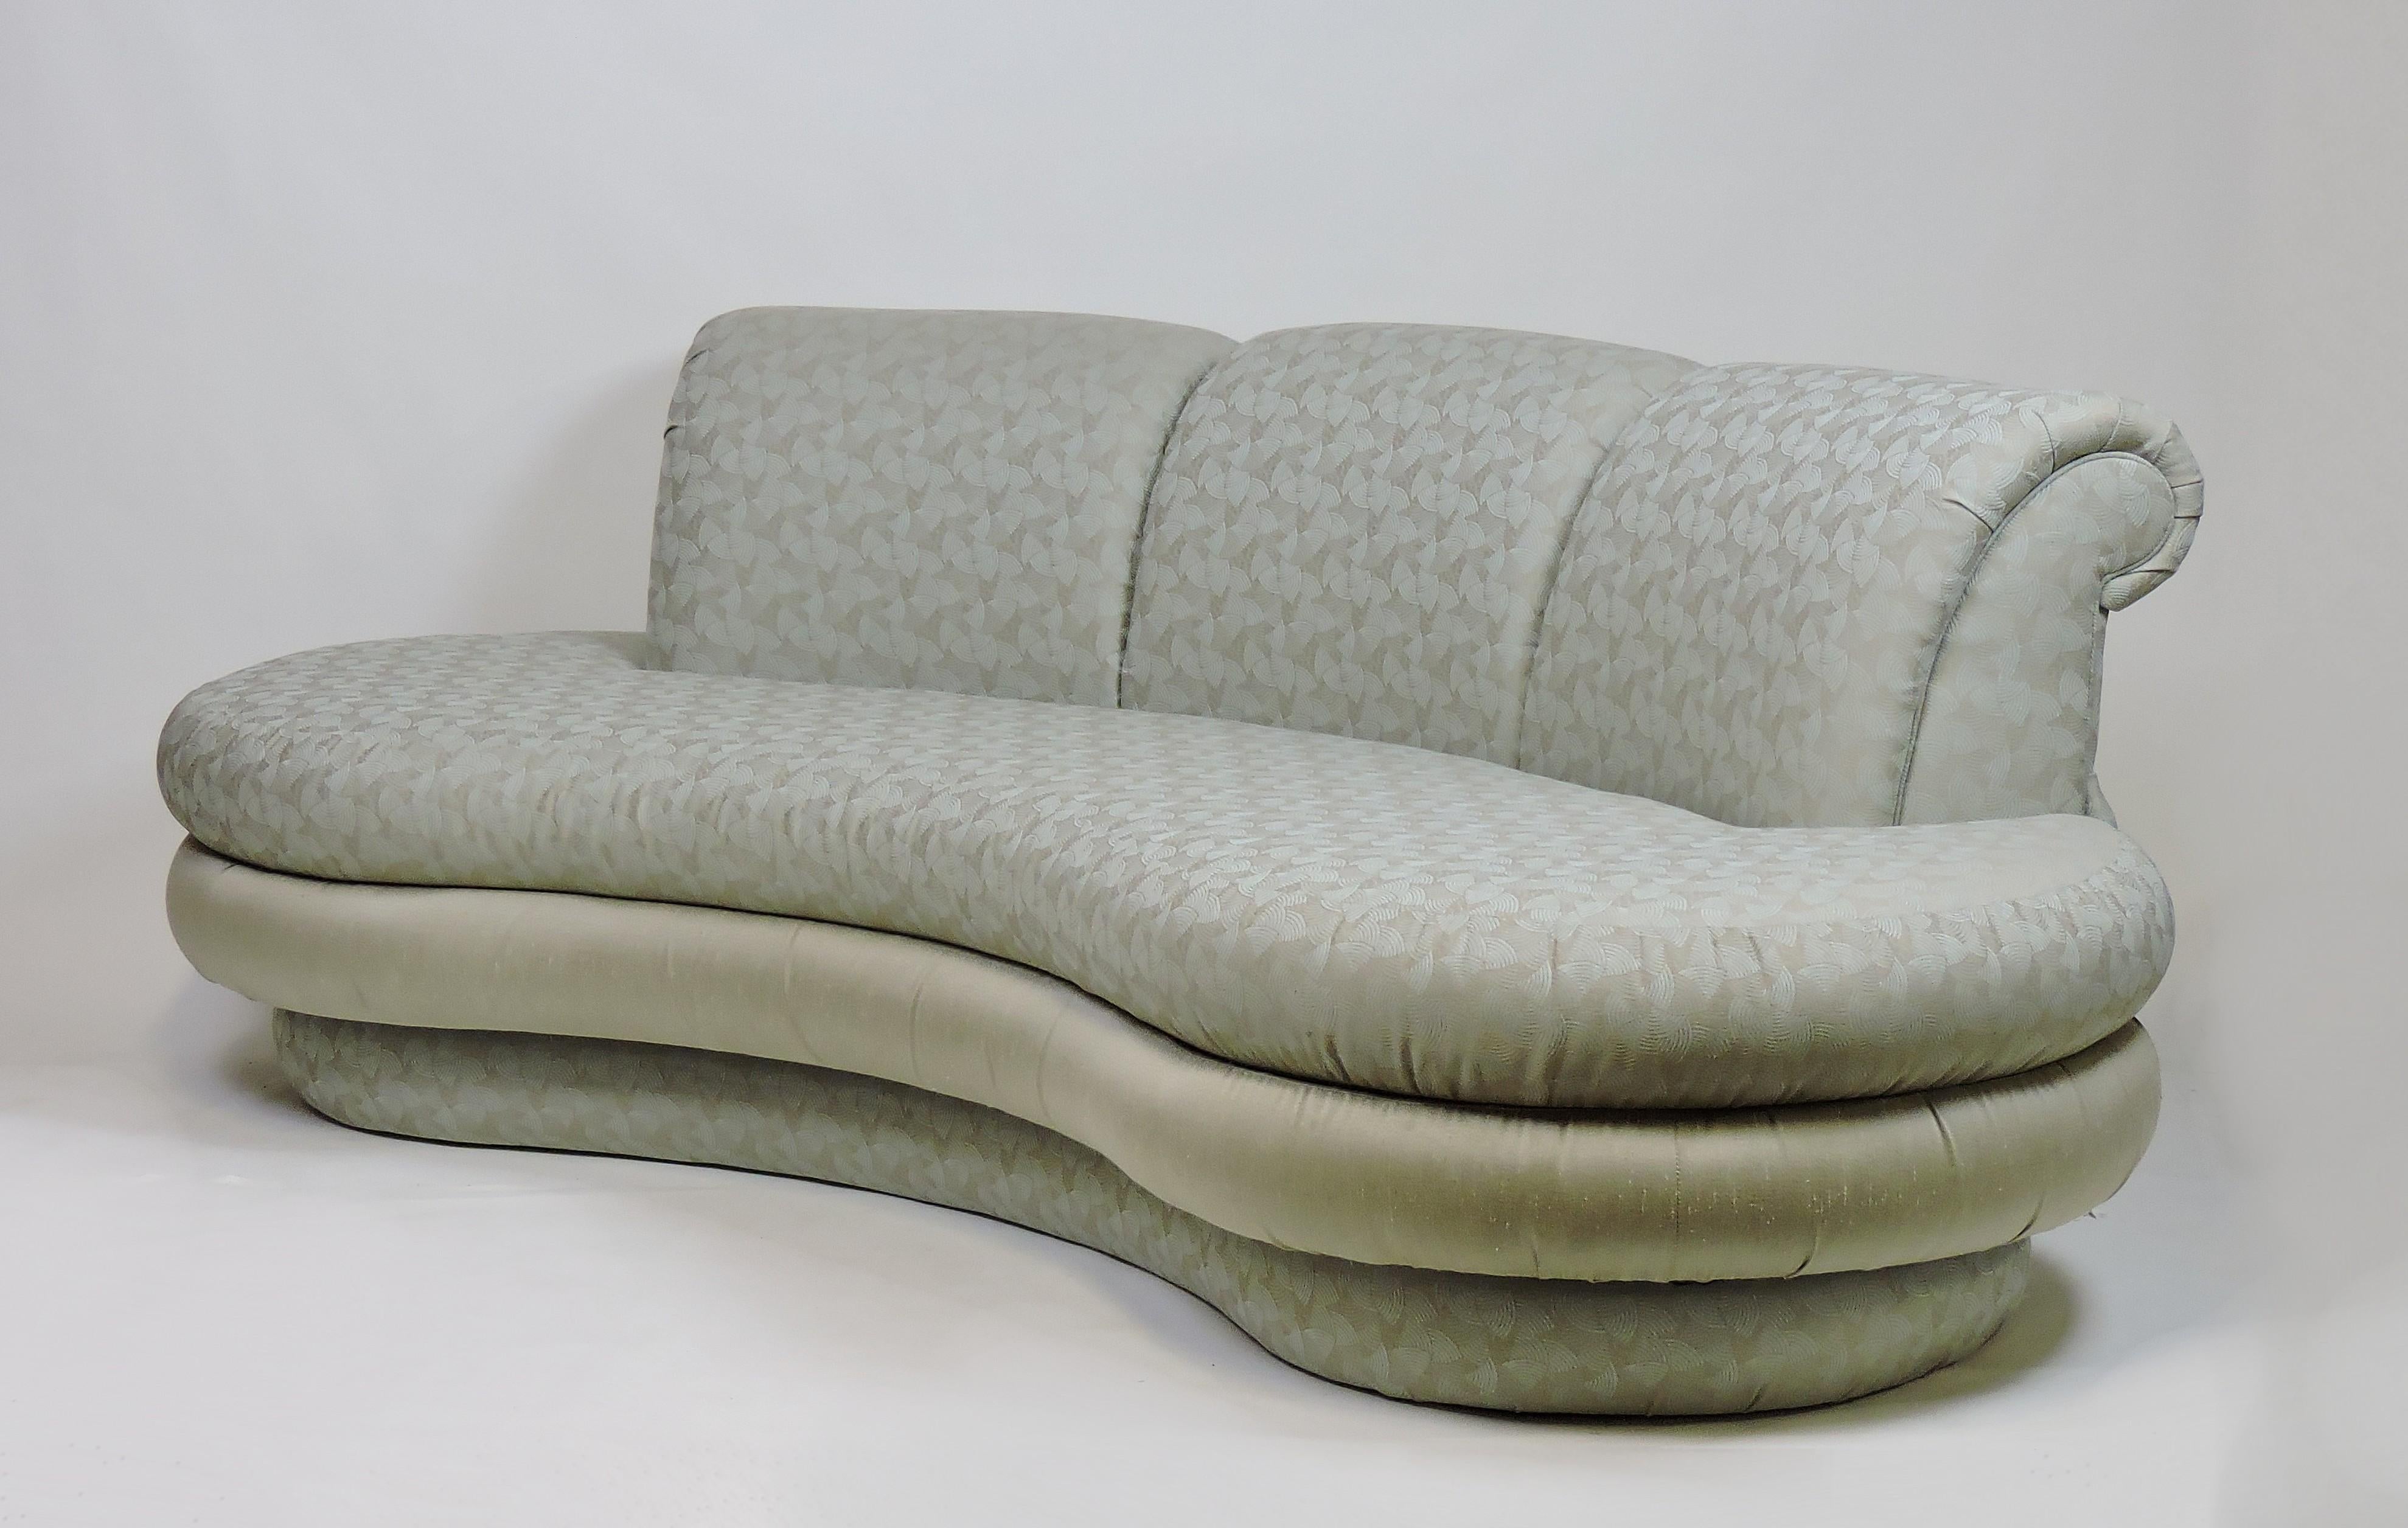 Pair of Adrian Pearsall Mid-Century Modern Cloud Kidney Shaped Sofas 1